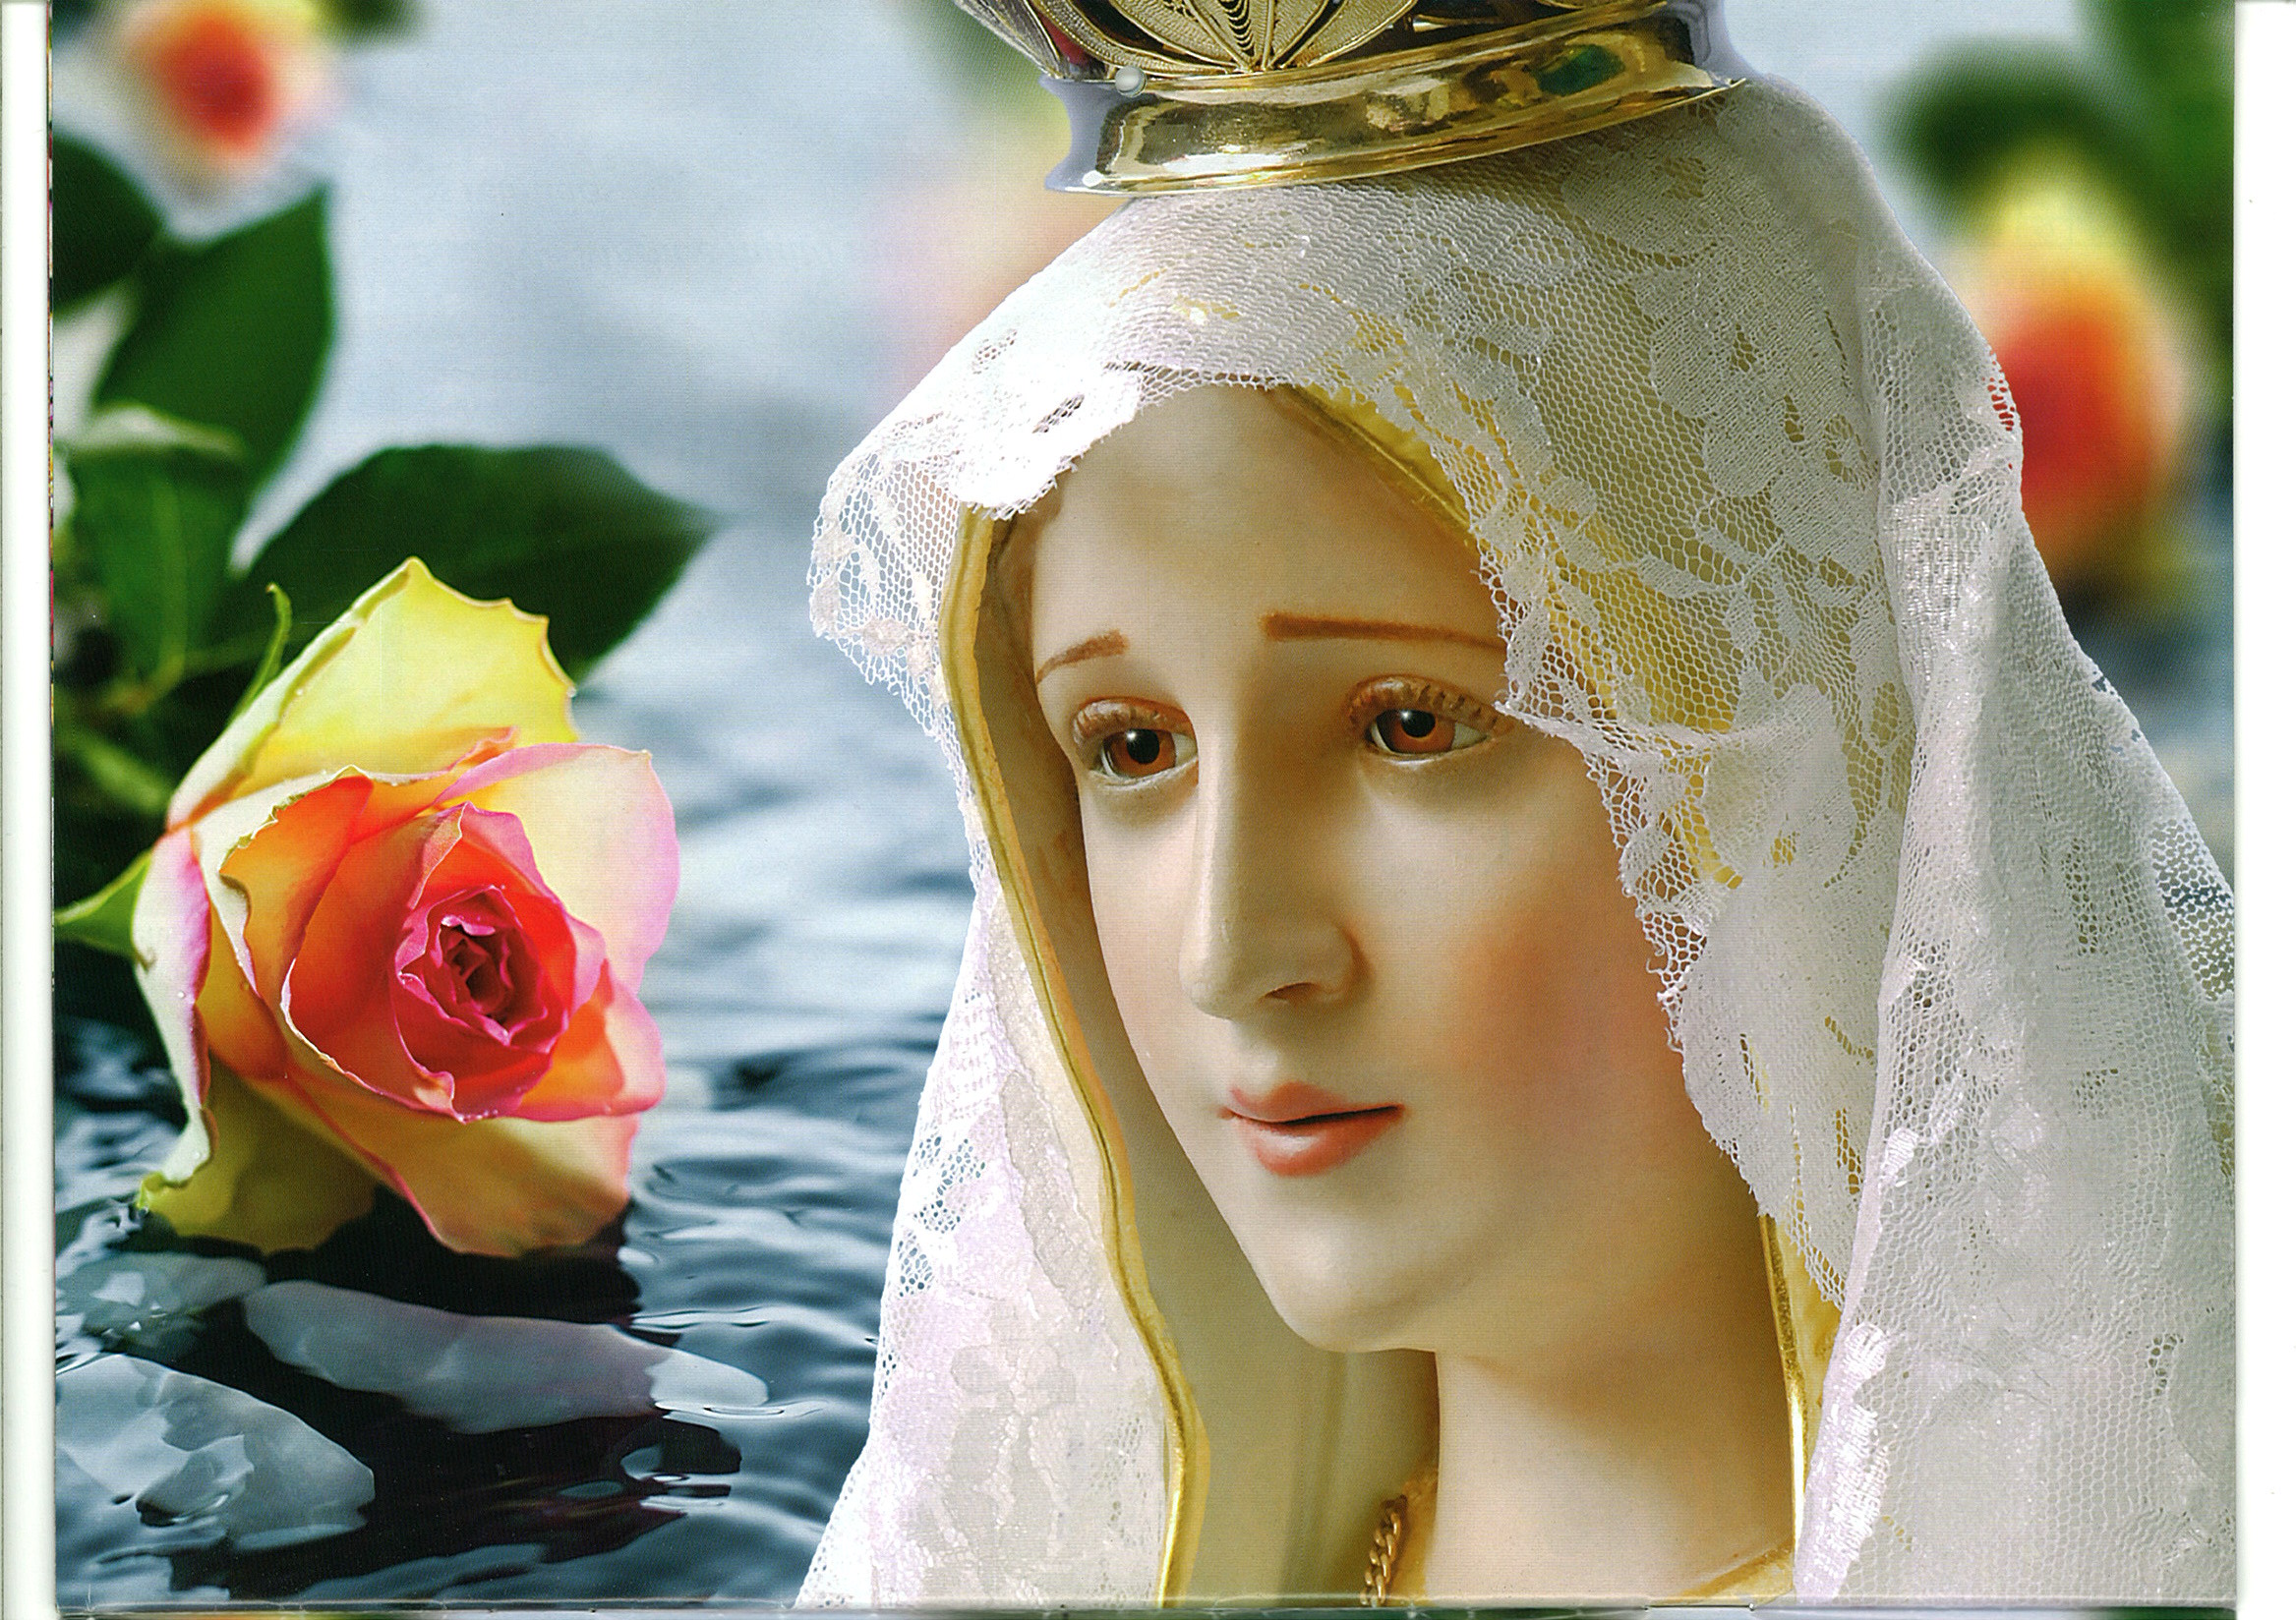 Mary Mother Of Jesus Our Lady Of Fatima Wallpaper  Resolution2335x1648   ID272241  wallhacom